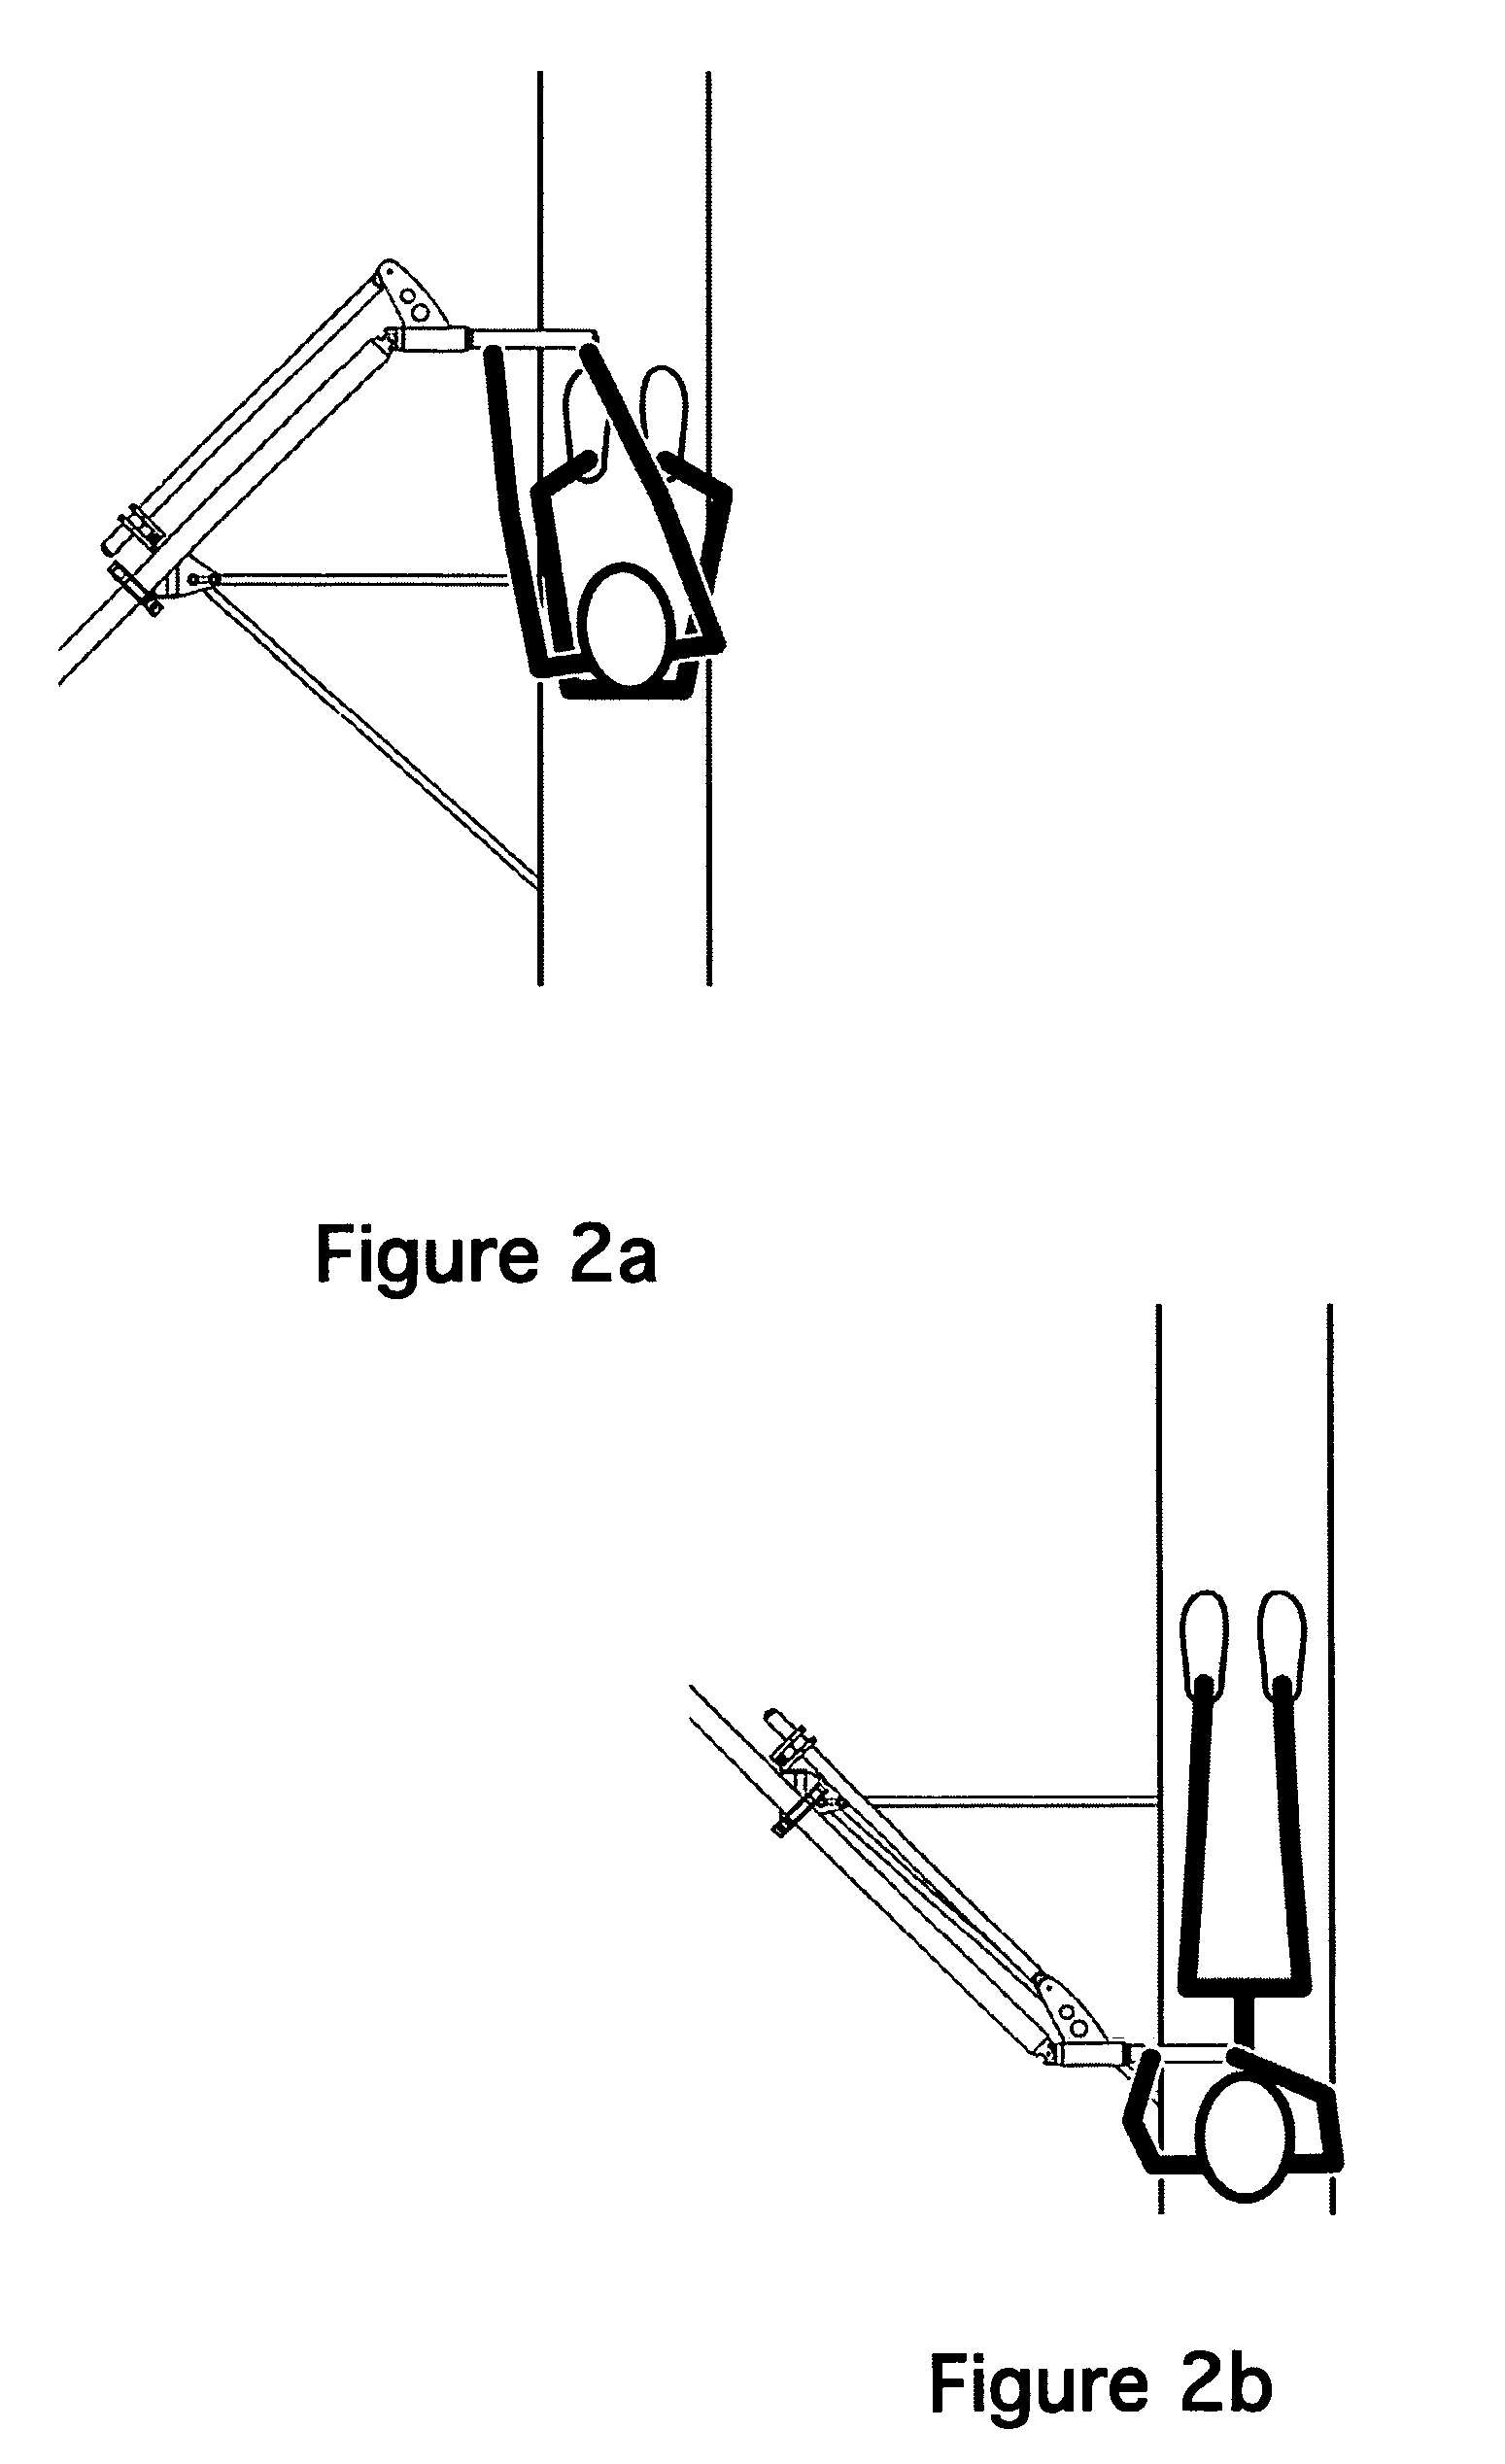 Rowing oar system with articulating handle